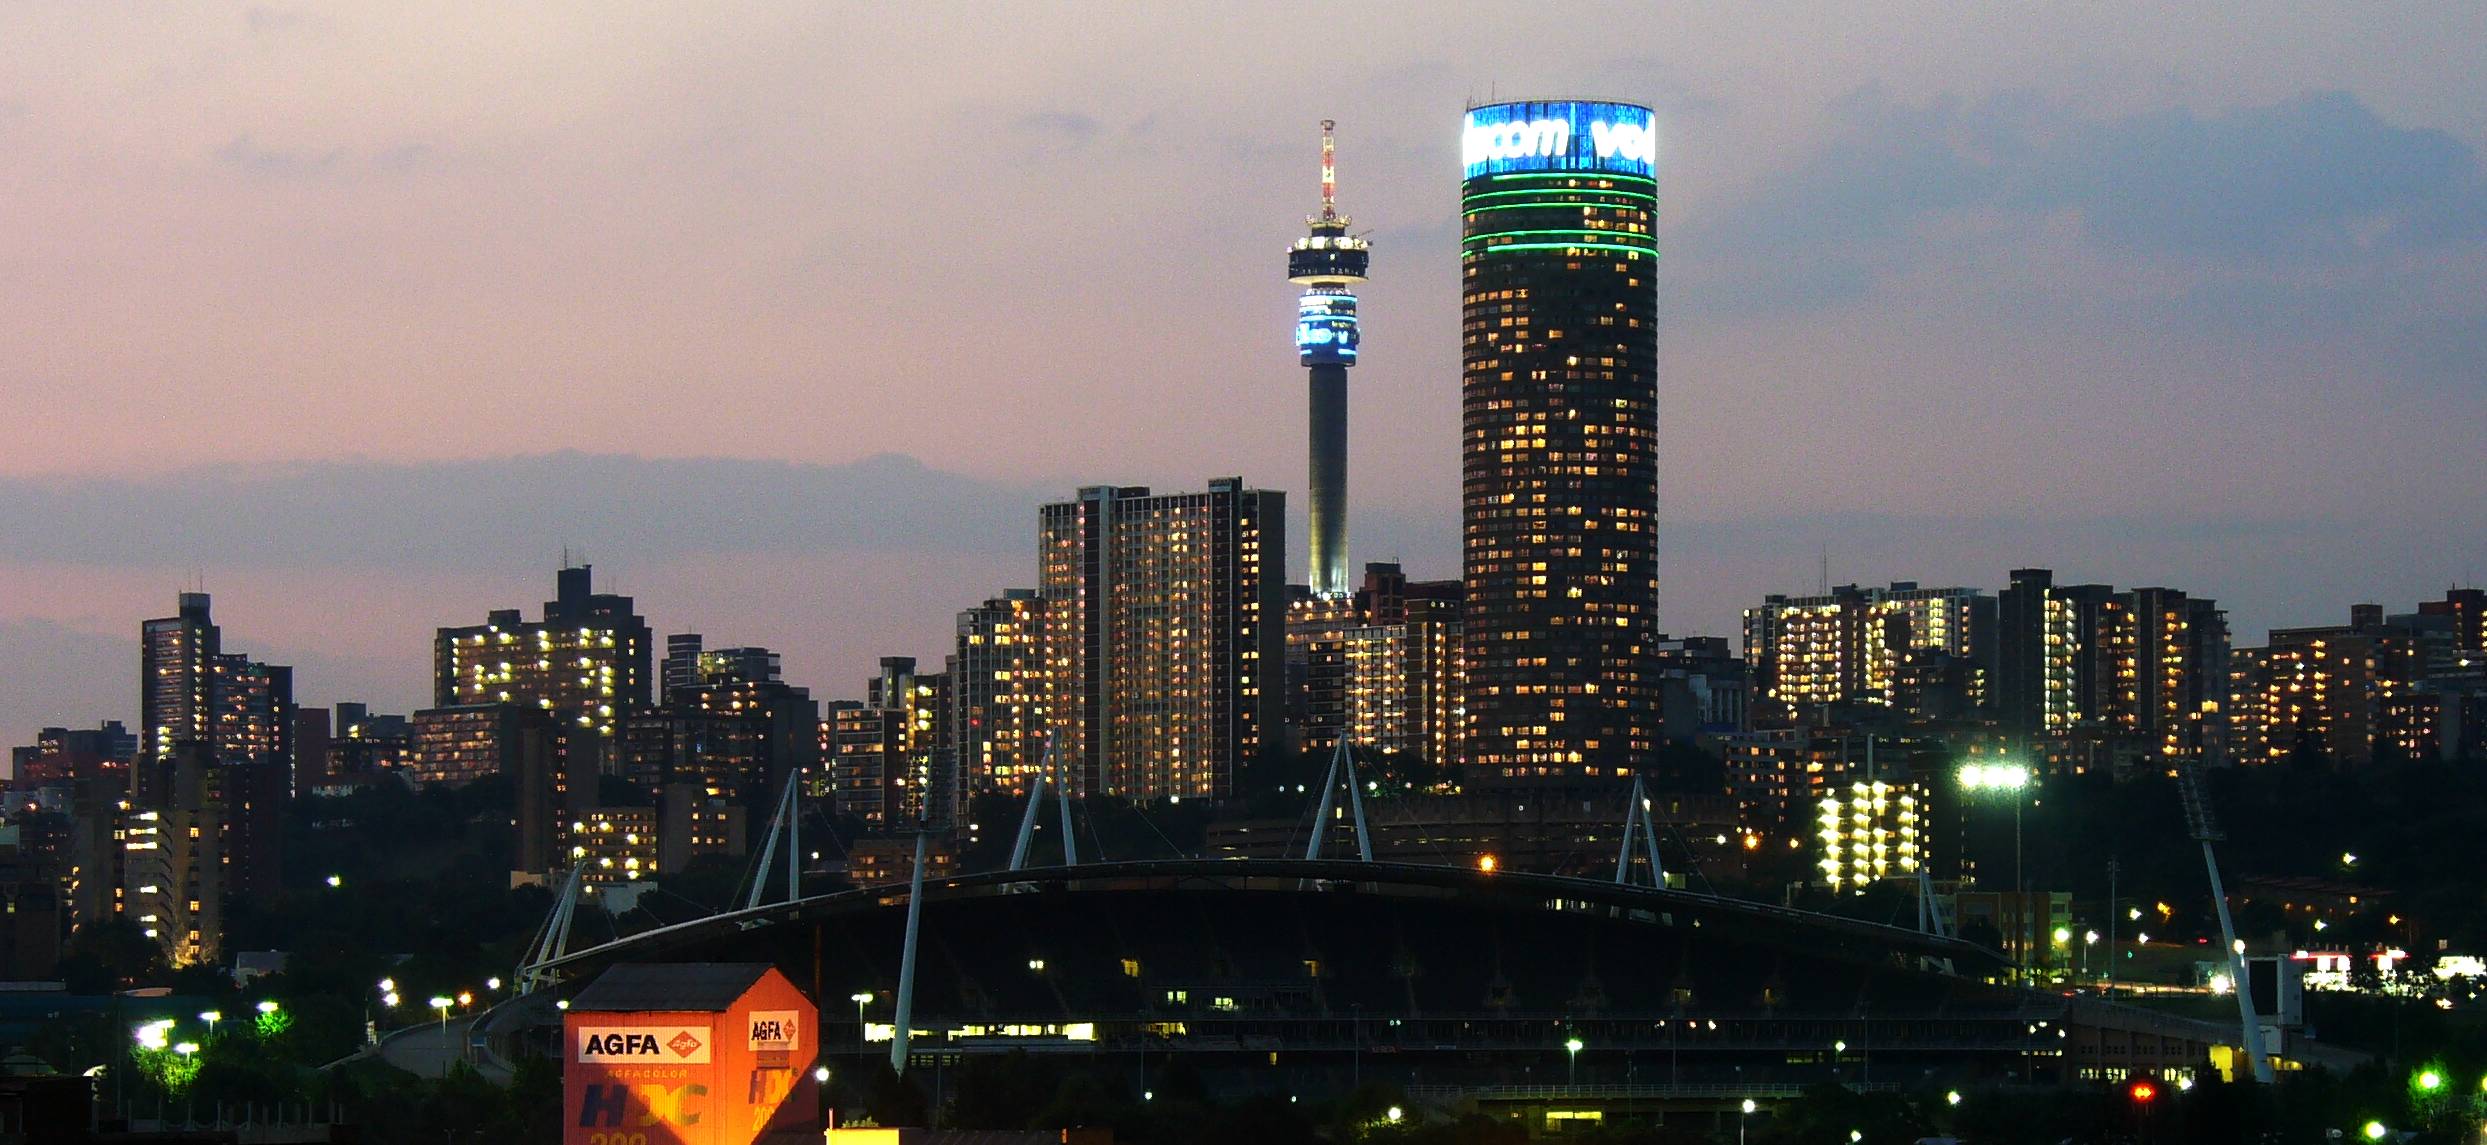 Johannesburg: Fascinating Facts and Figures About The City